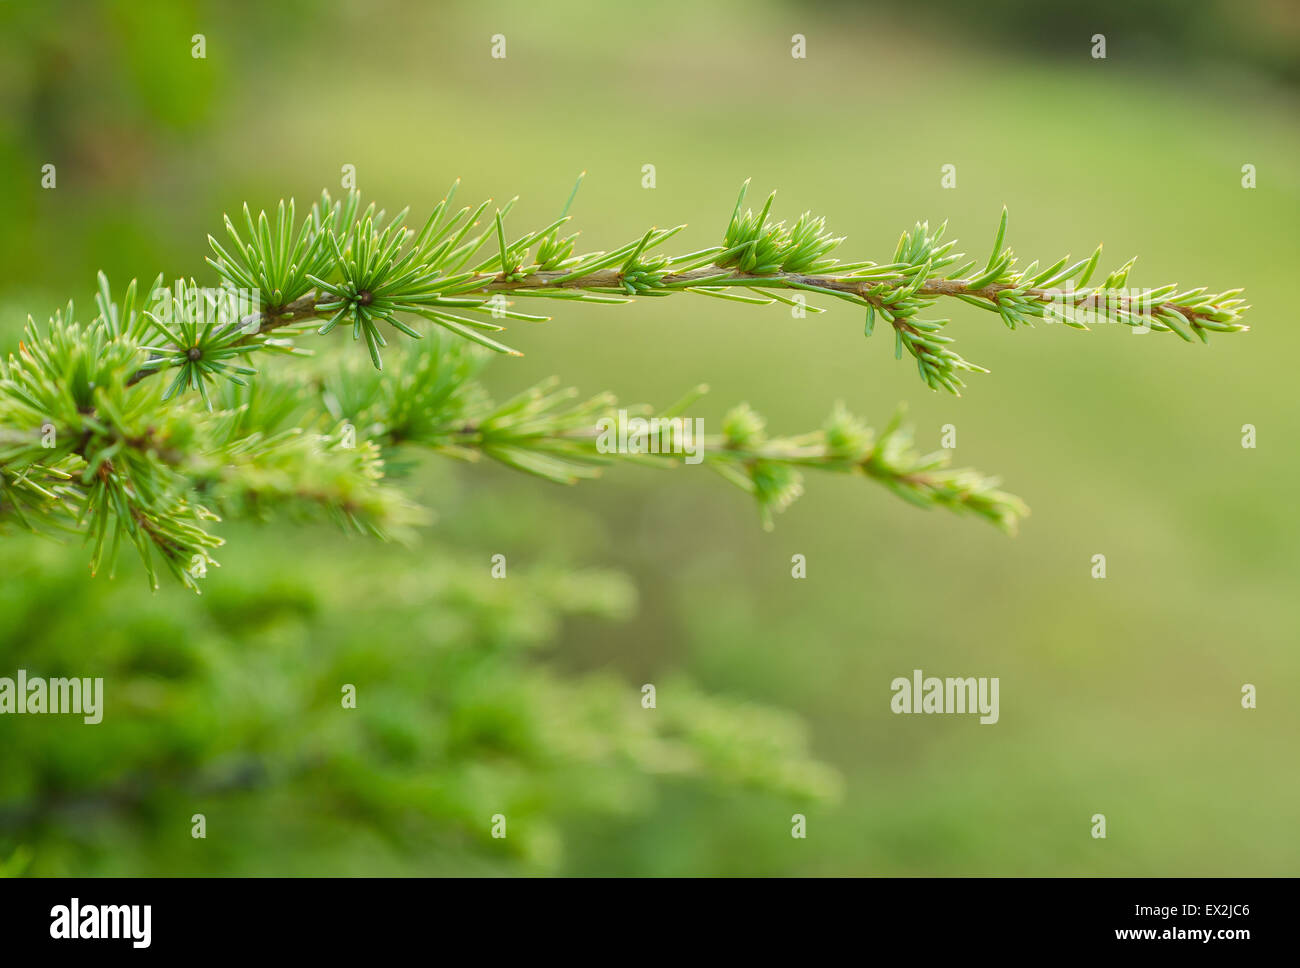 pine branch on blurred background Stock Photo